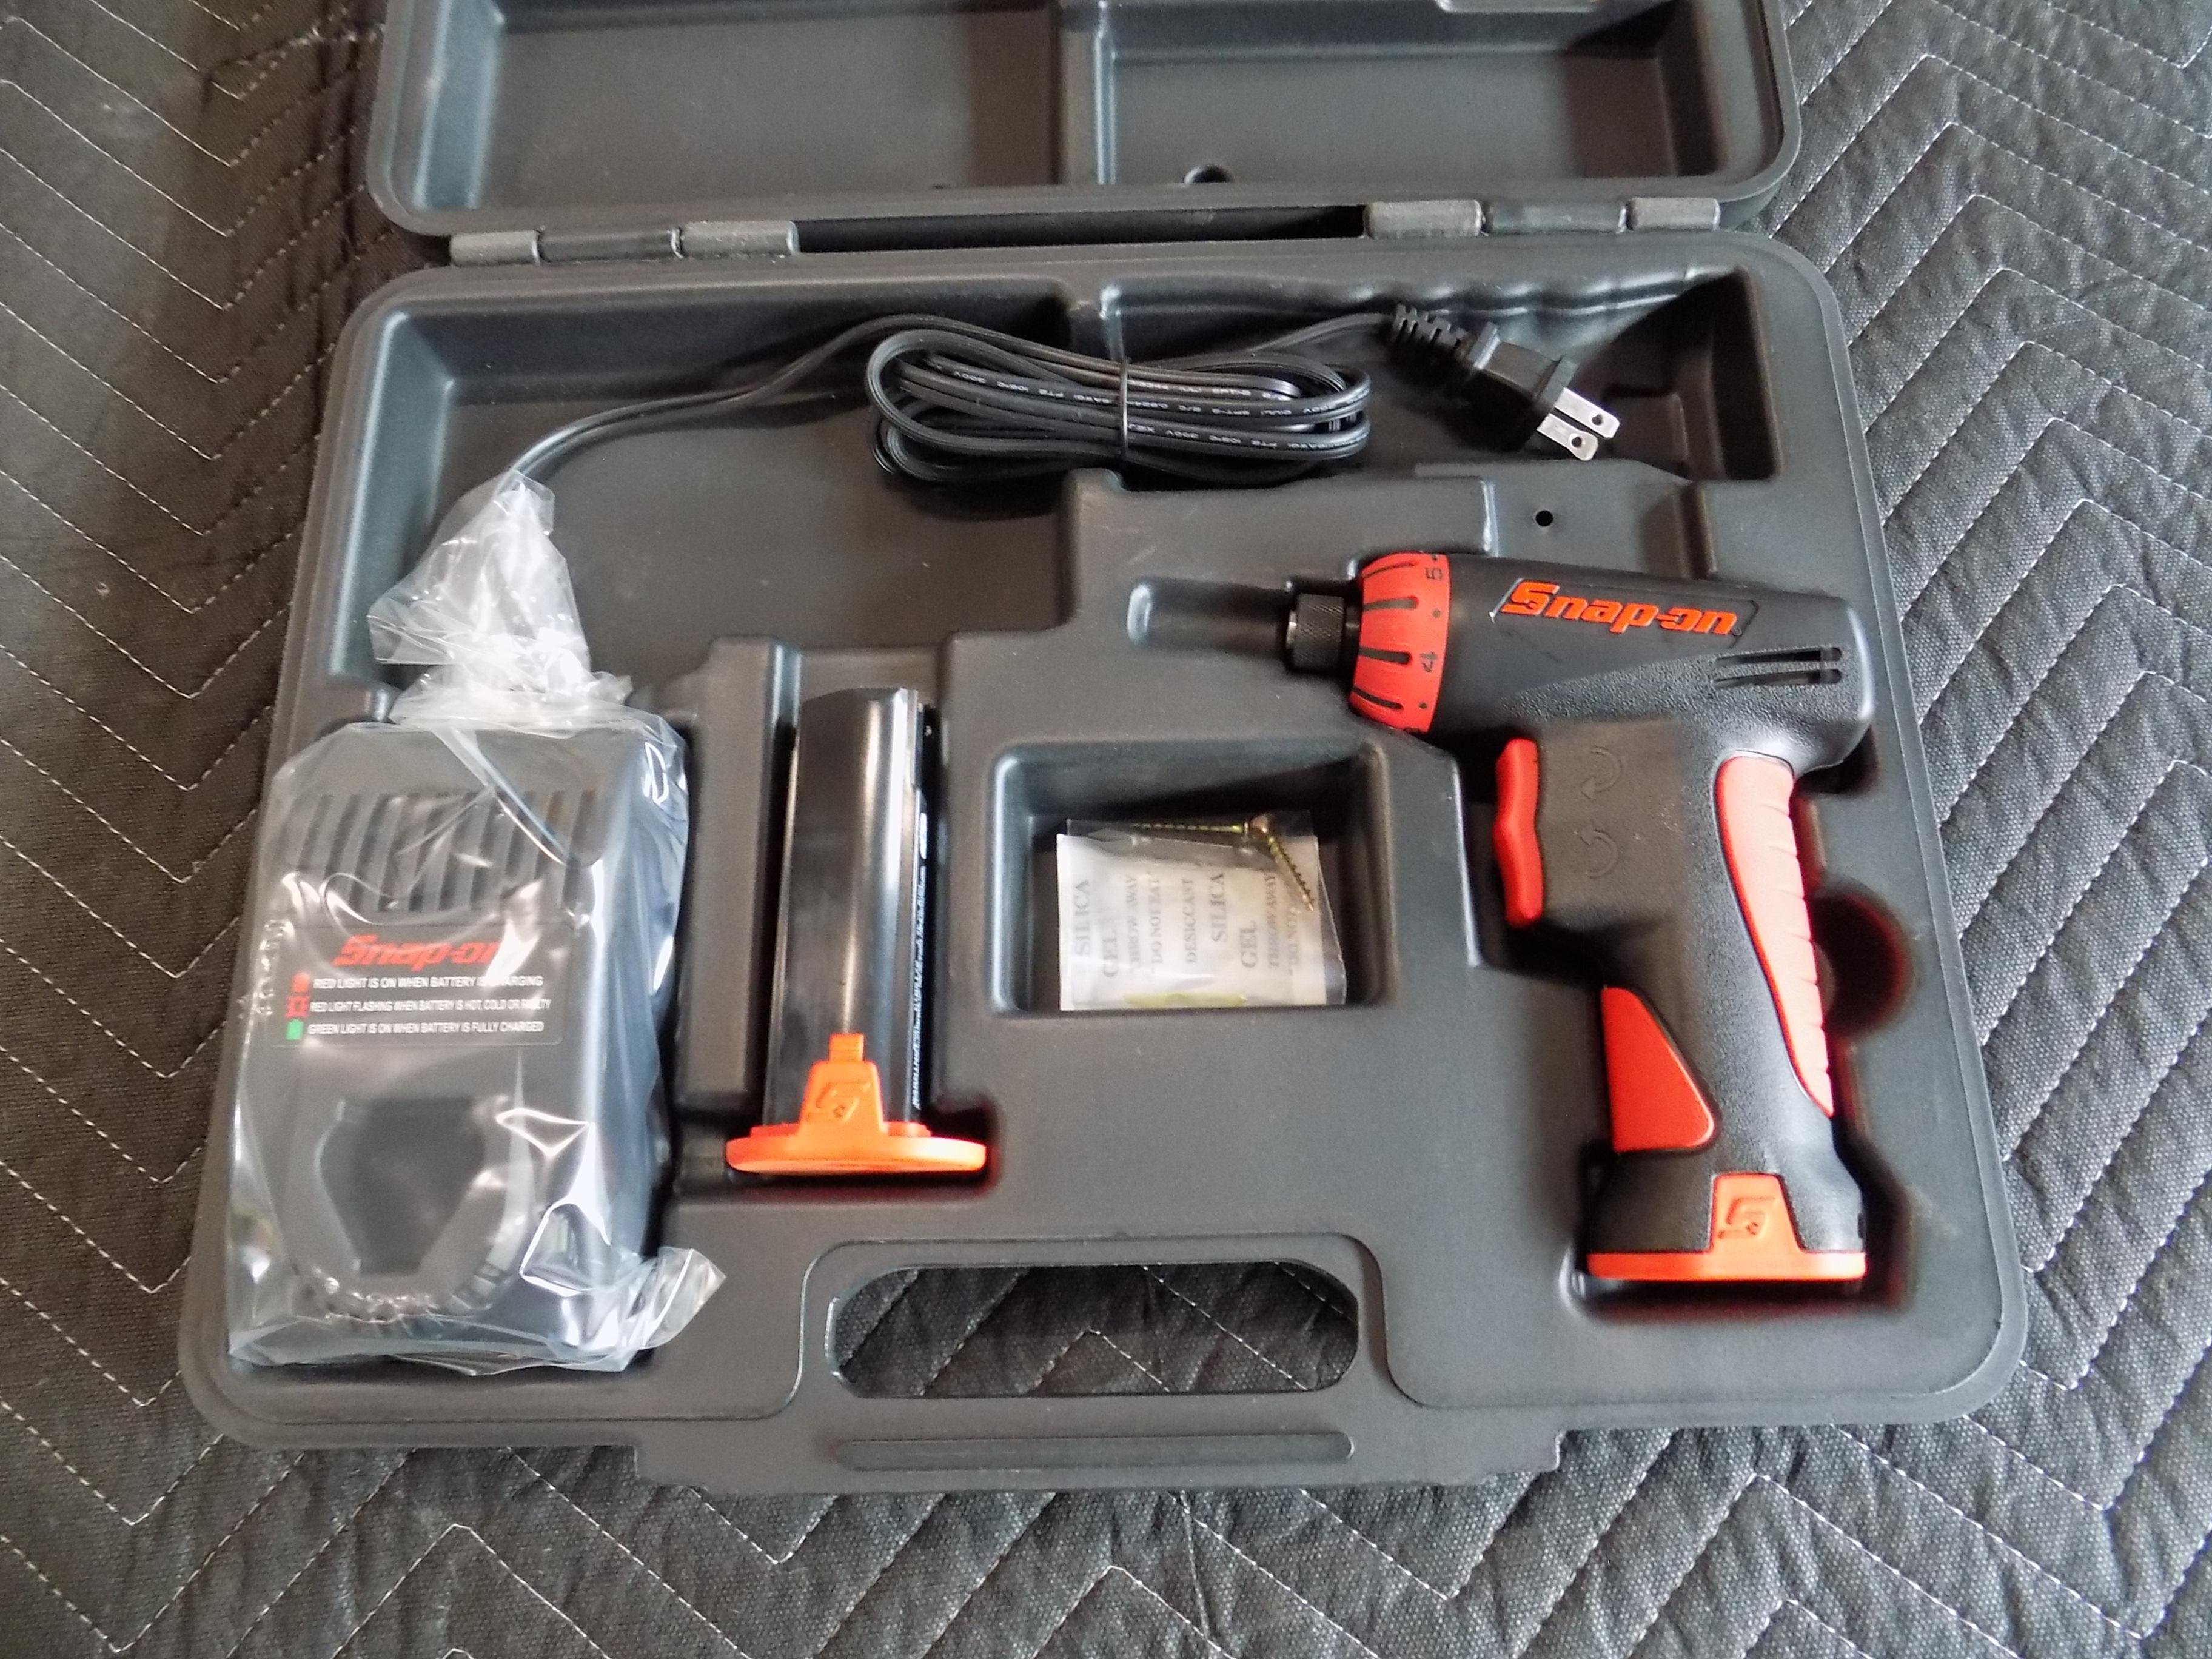 Snap on CTS561CL 1/4 inch cordless screwdriver